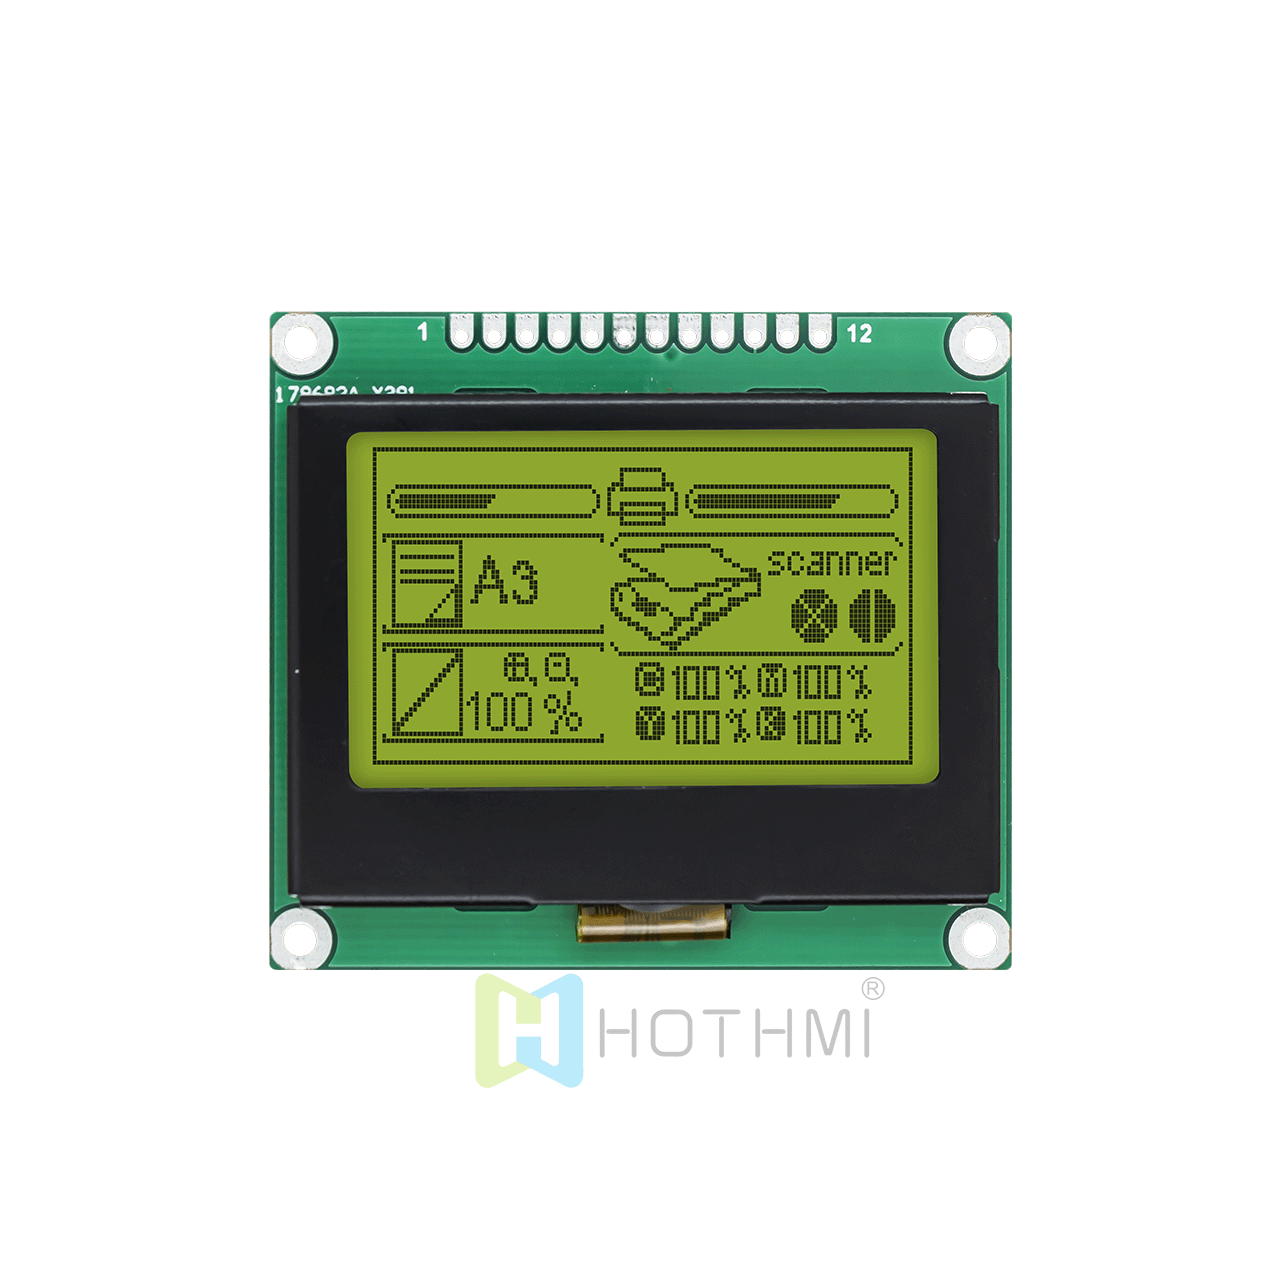 2 inch 128 x 64 LCD graphic display module | 12864 graphic dot matrix module | STN positive display yellow-green backlight | 3.3v